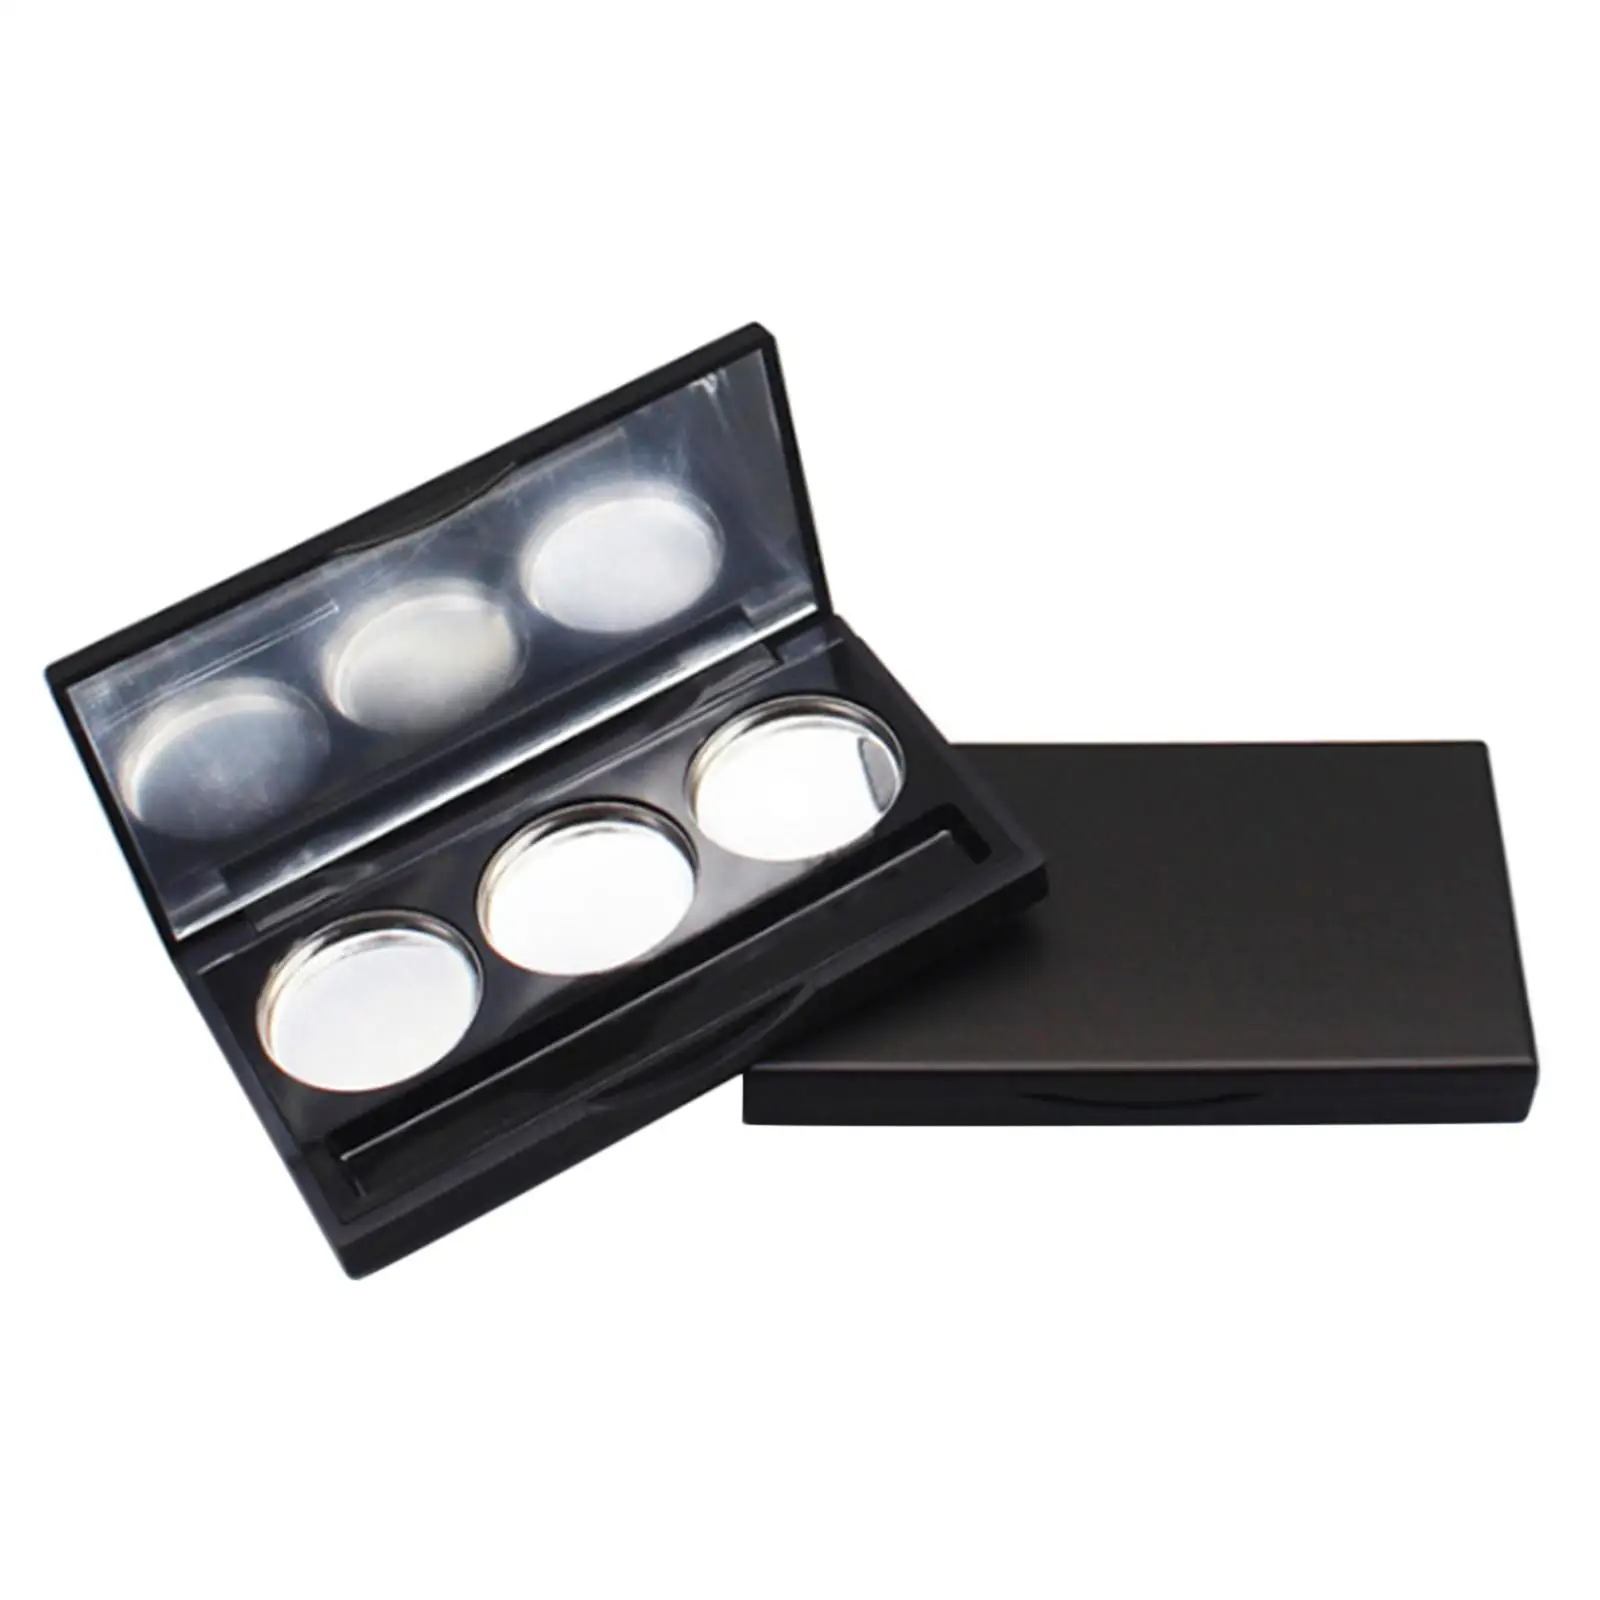 2x 3 Grids Empty Eyeshadow Box with Mirror Empty Makeup Palette Case for Women Girls